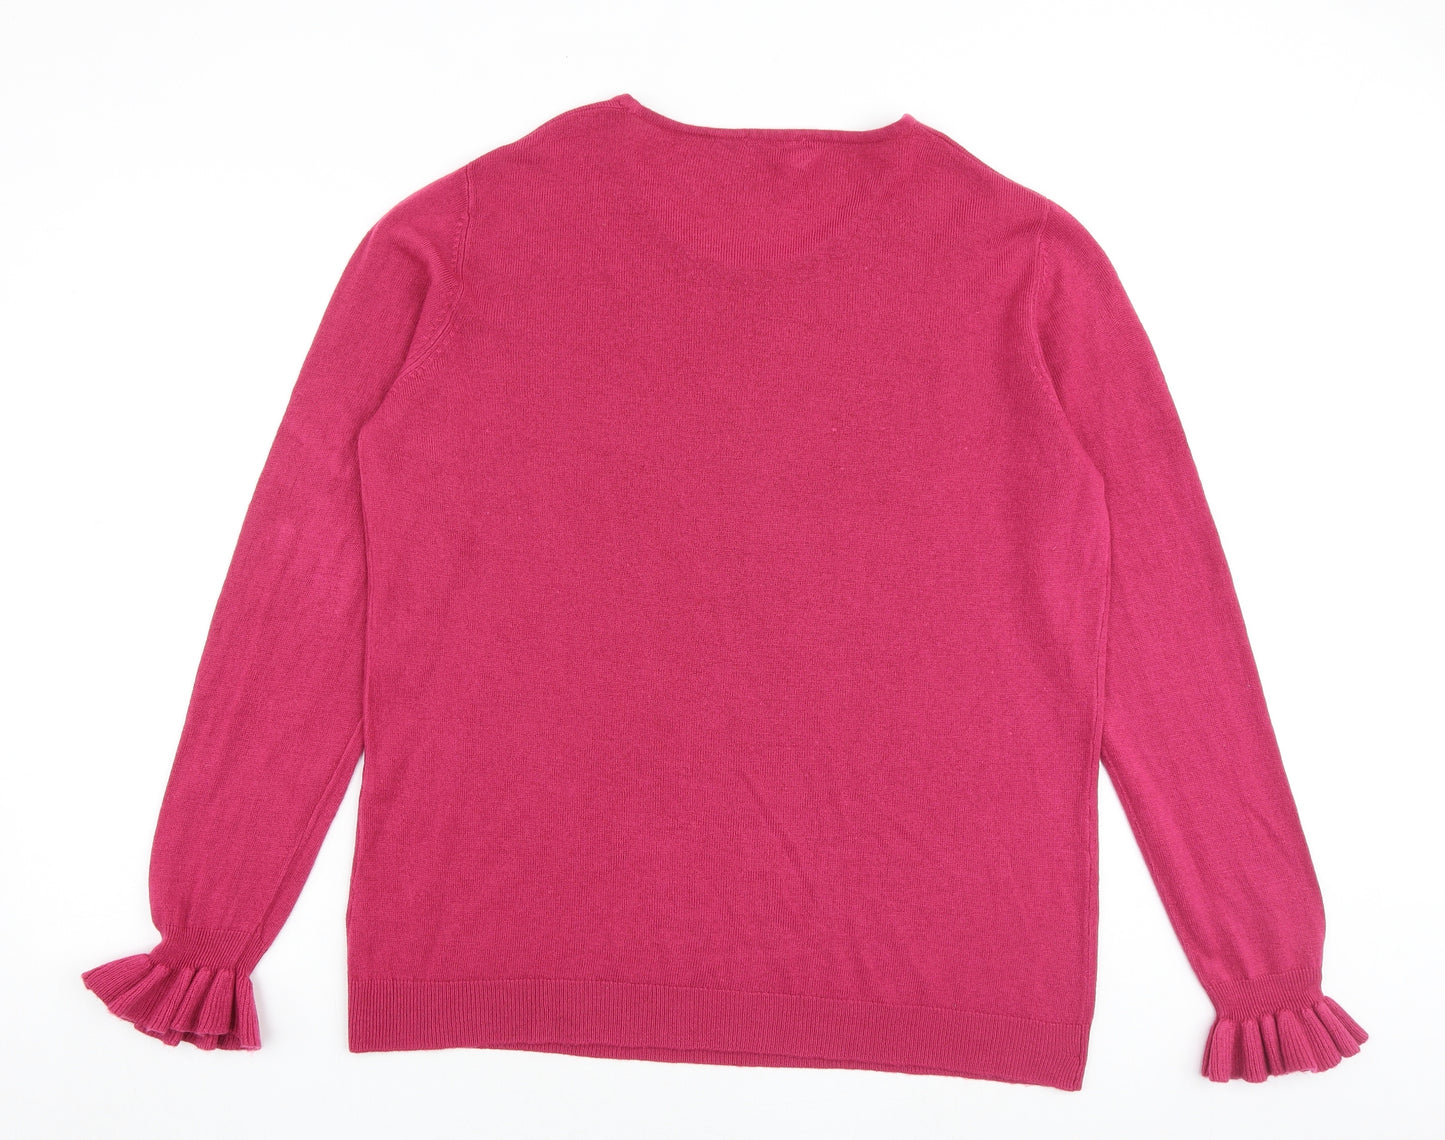 La Redoute Womens Pink Round Neck Acrylic Pullover Jumper Size 22 - Size 22-24